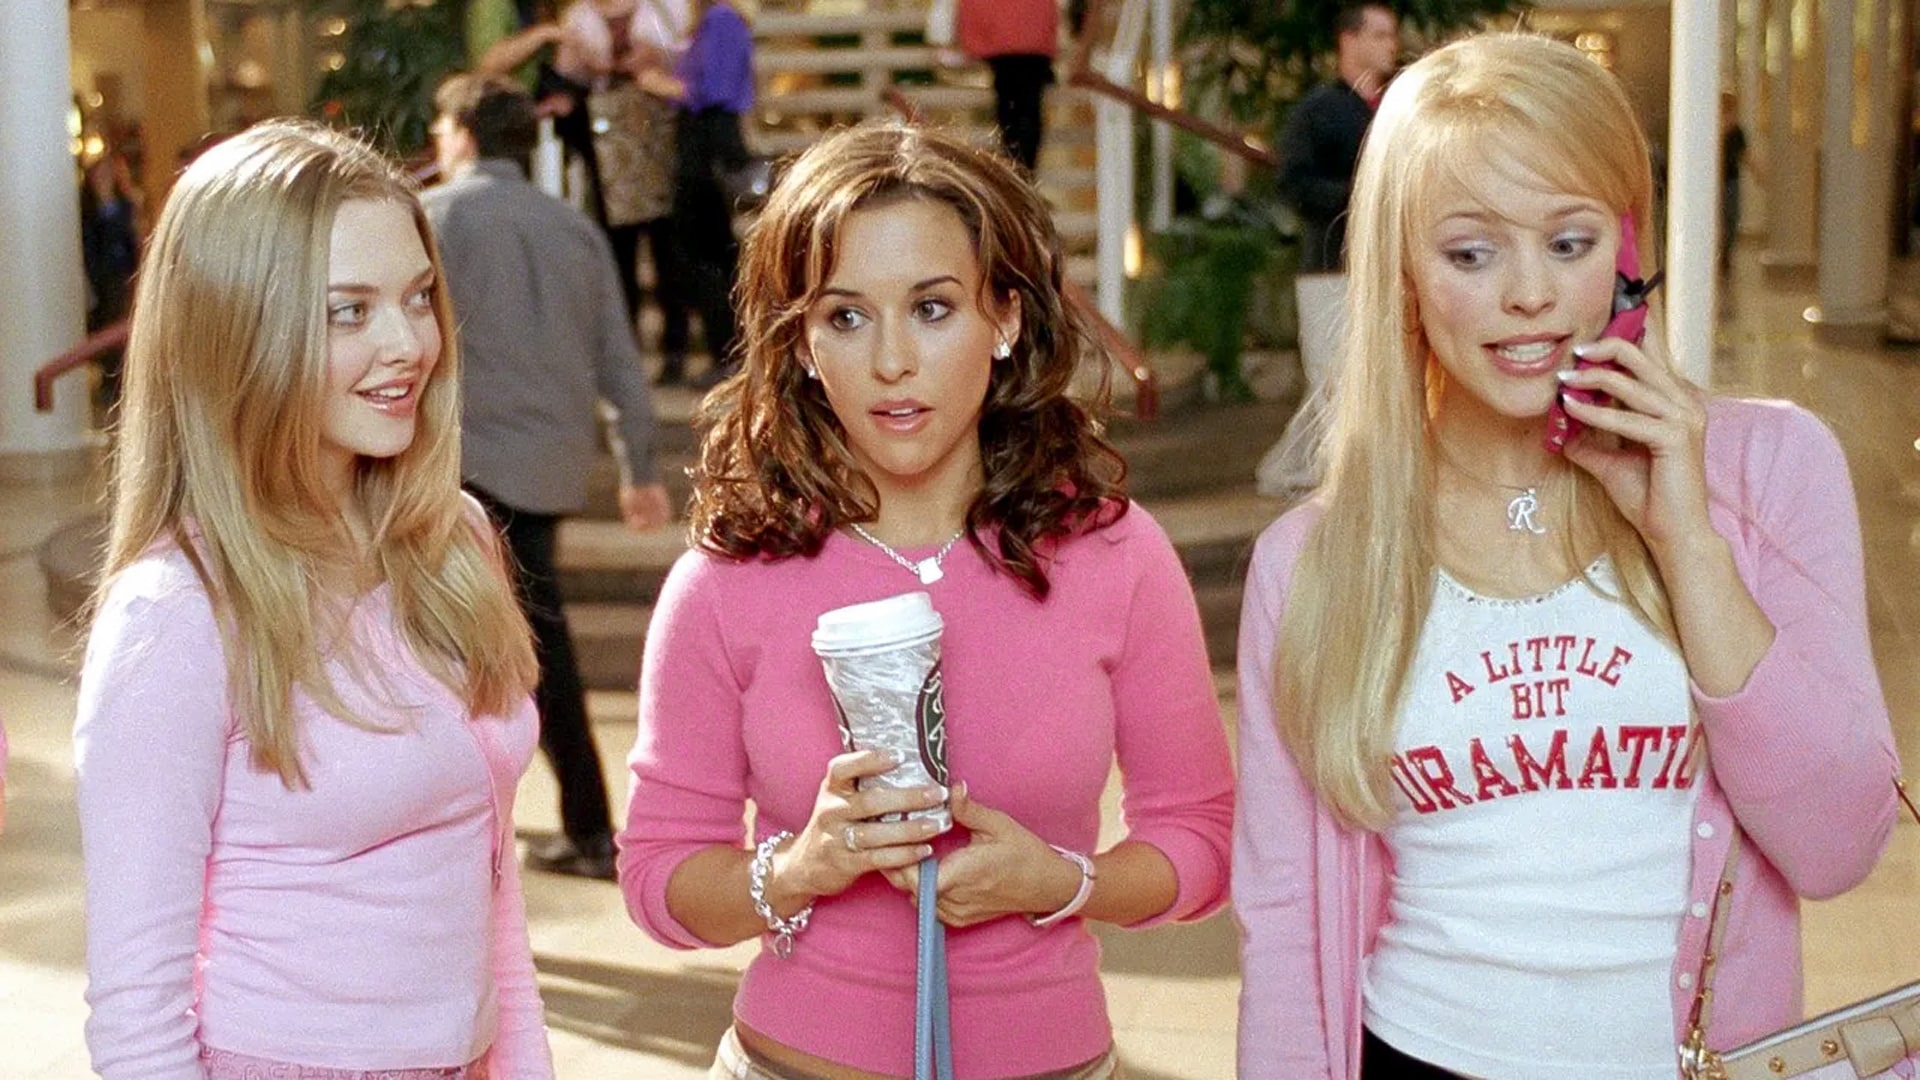 Mean Girls Movie - 23 Mean Girls (2004) Movie Facts You Haven't Read Before